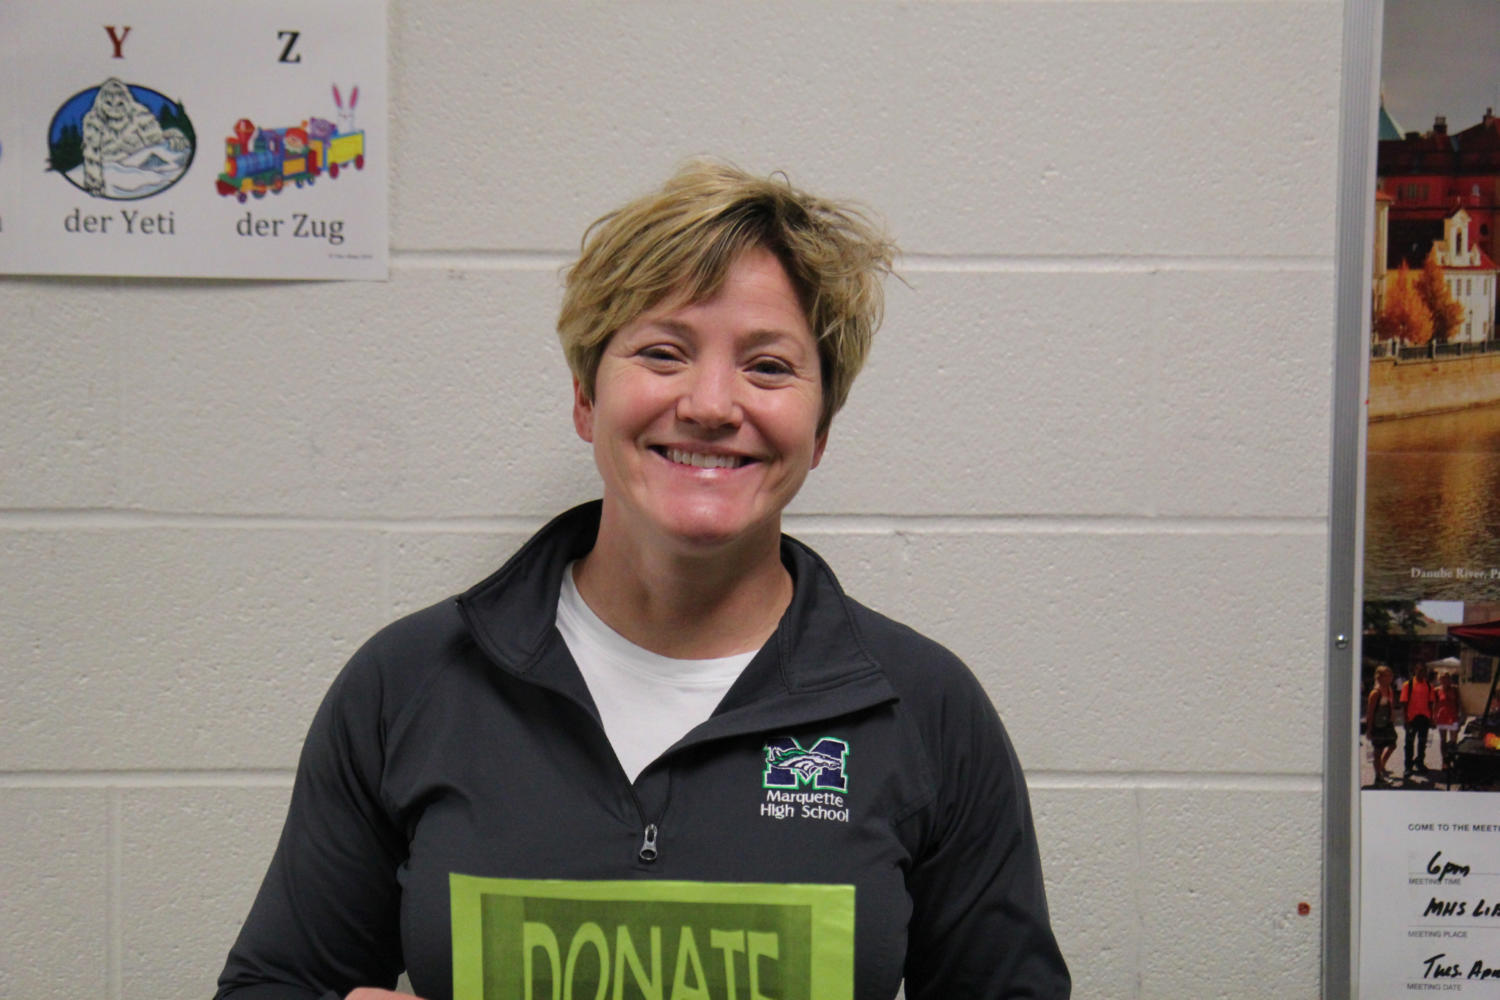 Amy Doyle, social studies teacher, is leading the fundraiser for Eureka High Schools flood.  She is working with multiple sports teams at MHS, including softball and basketball.